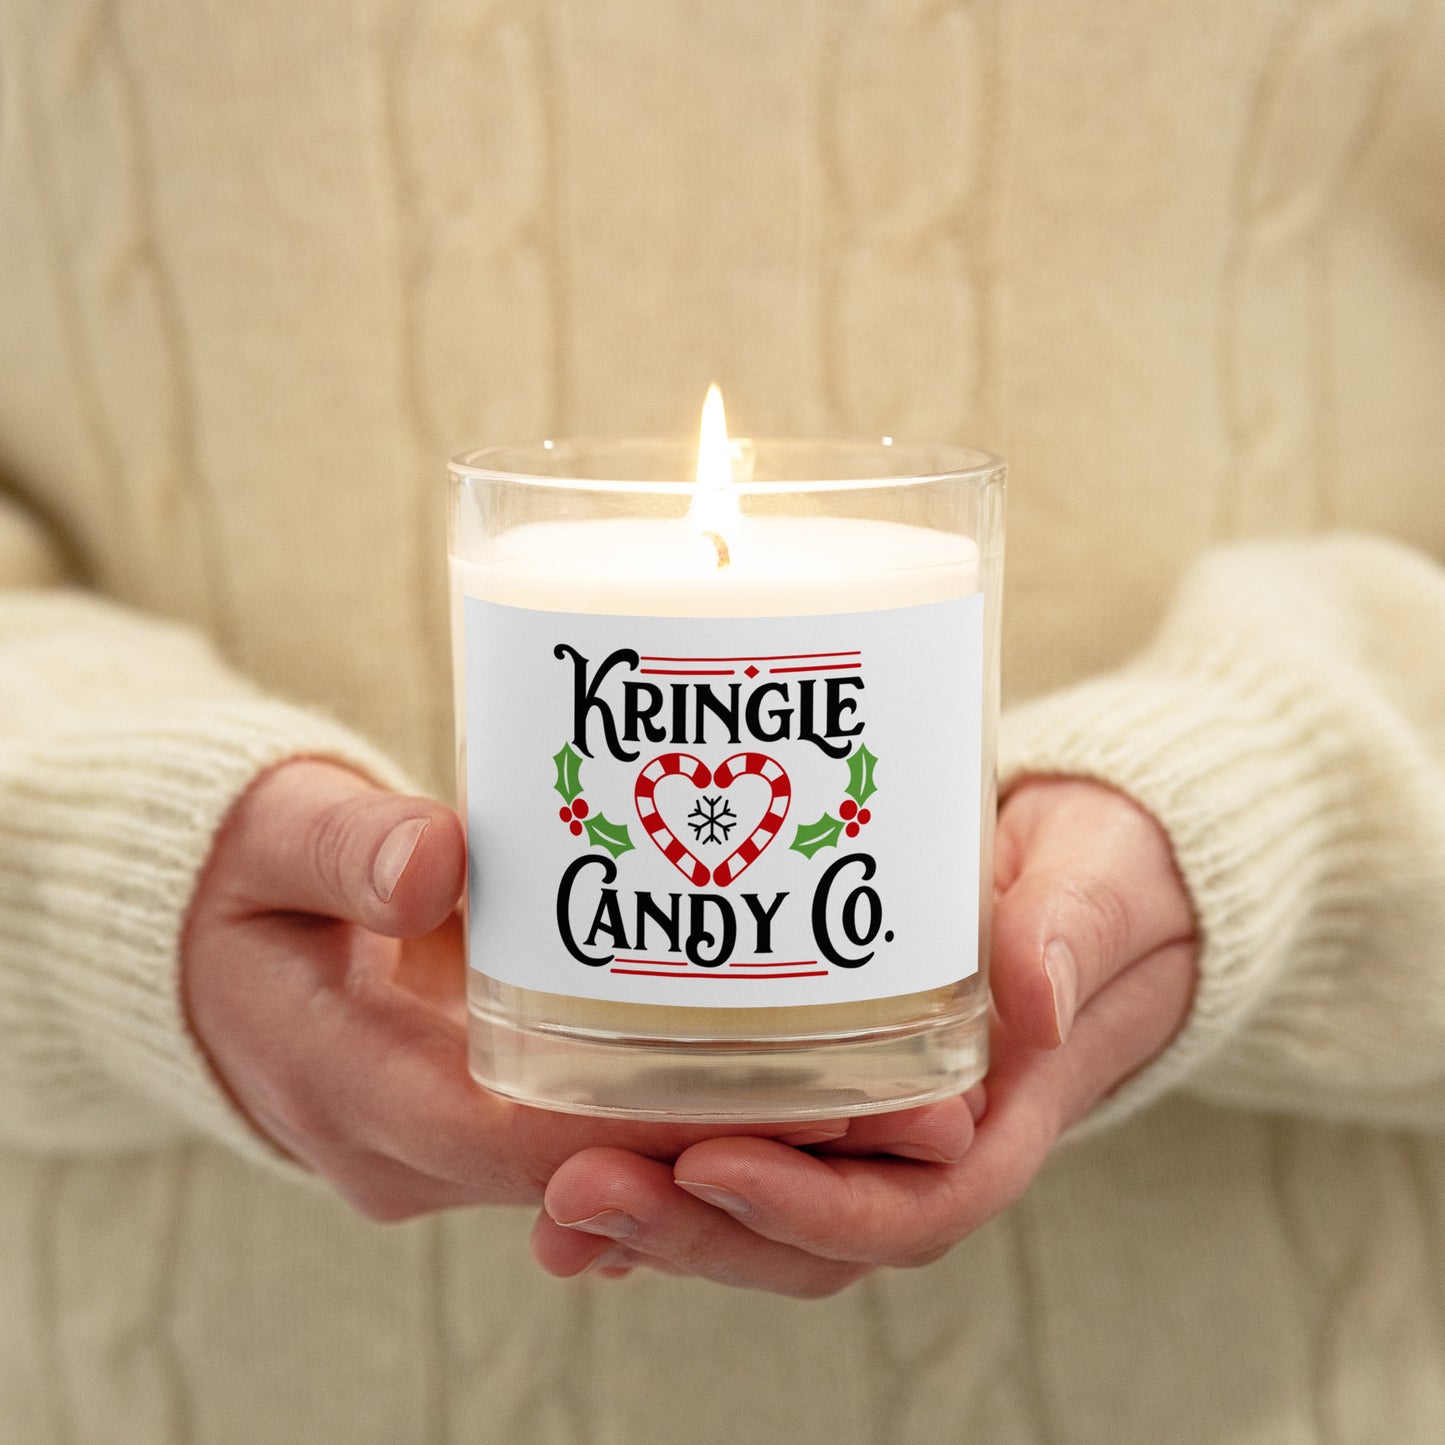 Kringle Candy Co. Glass Jar Soy Wax Candle